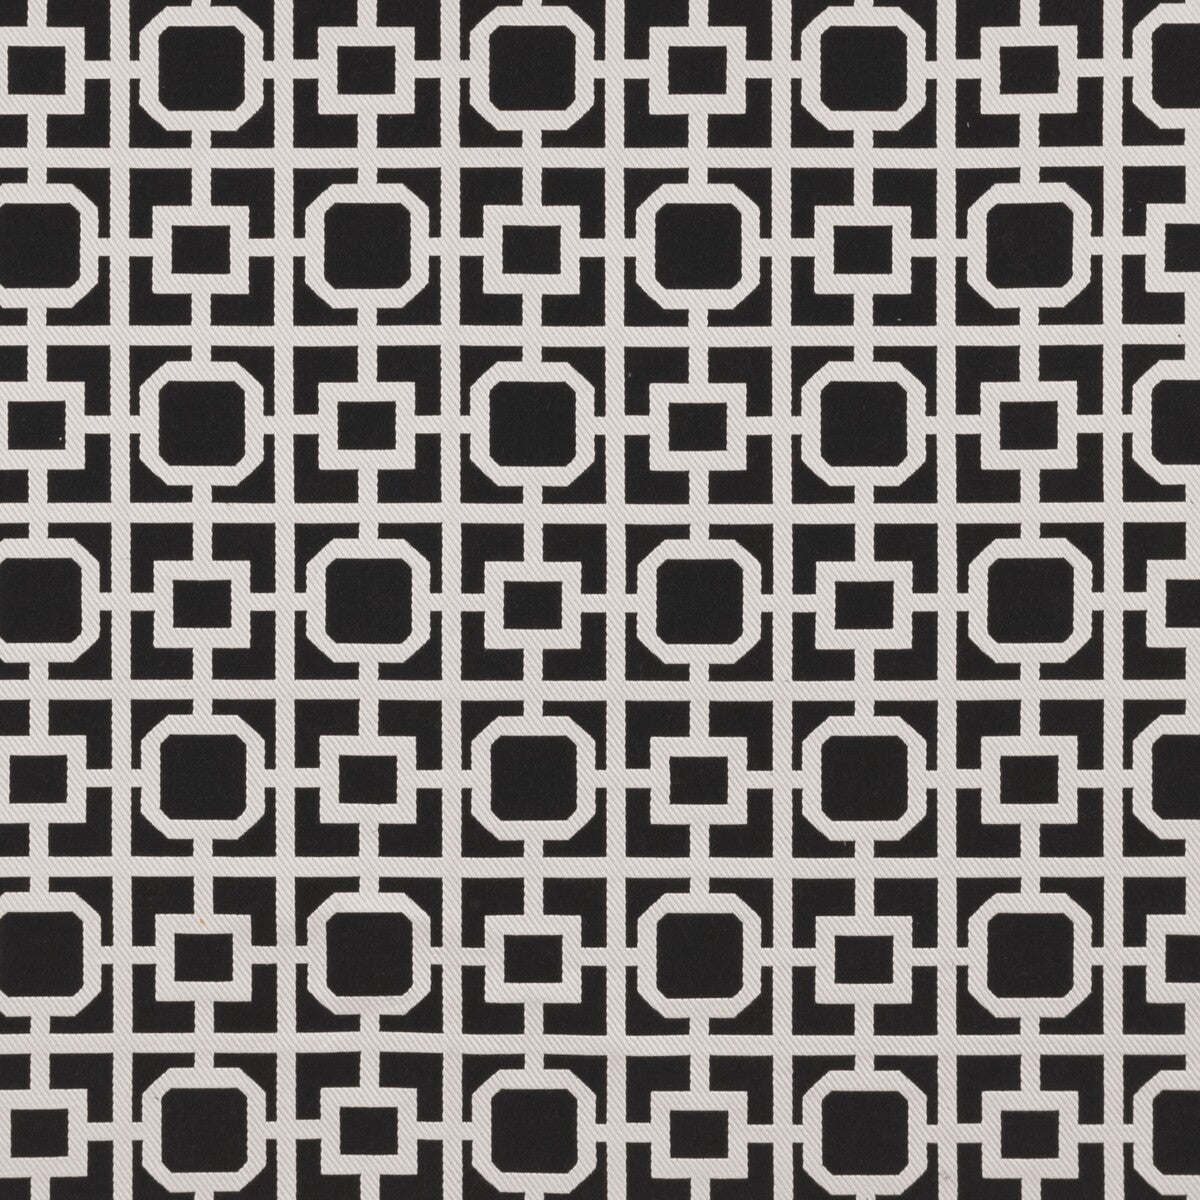 Bw1017 fabric in black/white color - pattern F0890/01.CAC.0 - by Clarke And Clarke in the Clarke &amp; Clarke Black + White collection